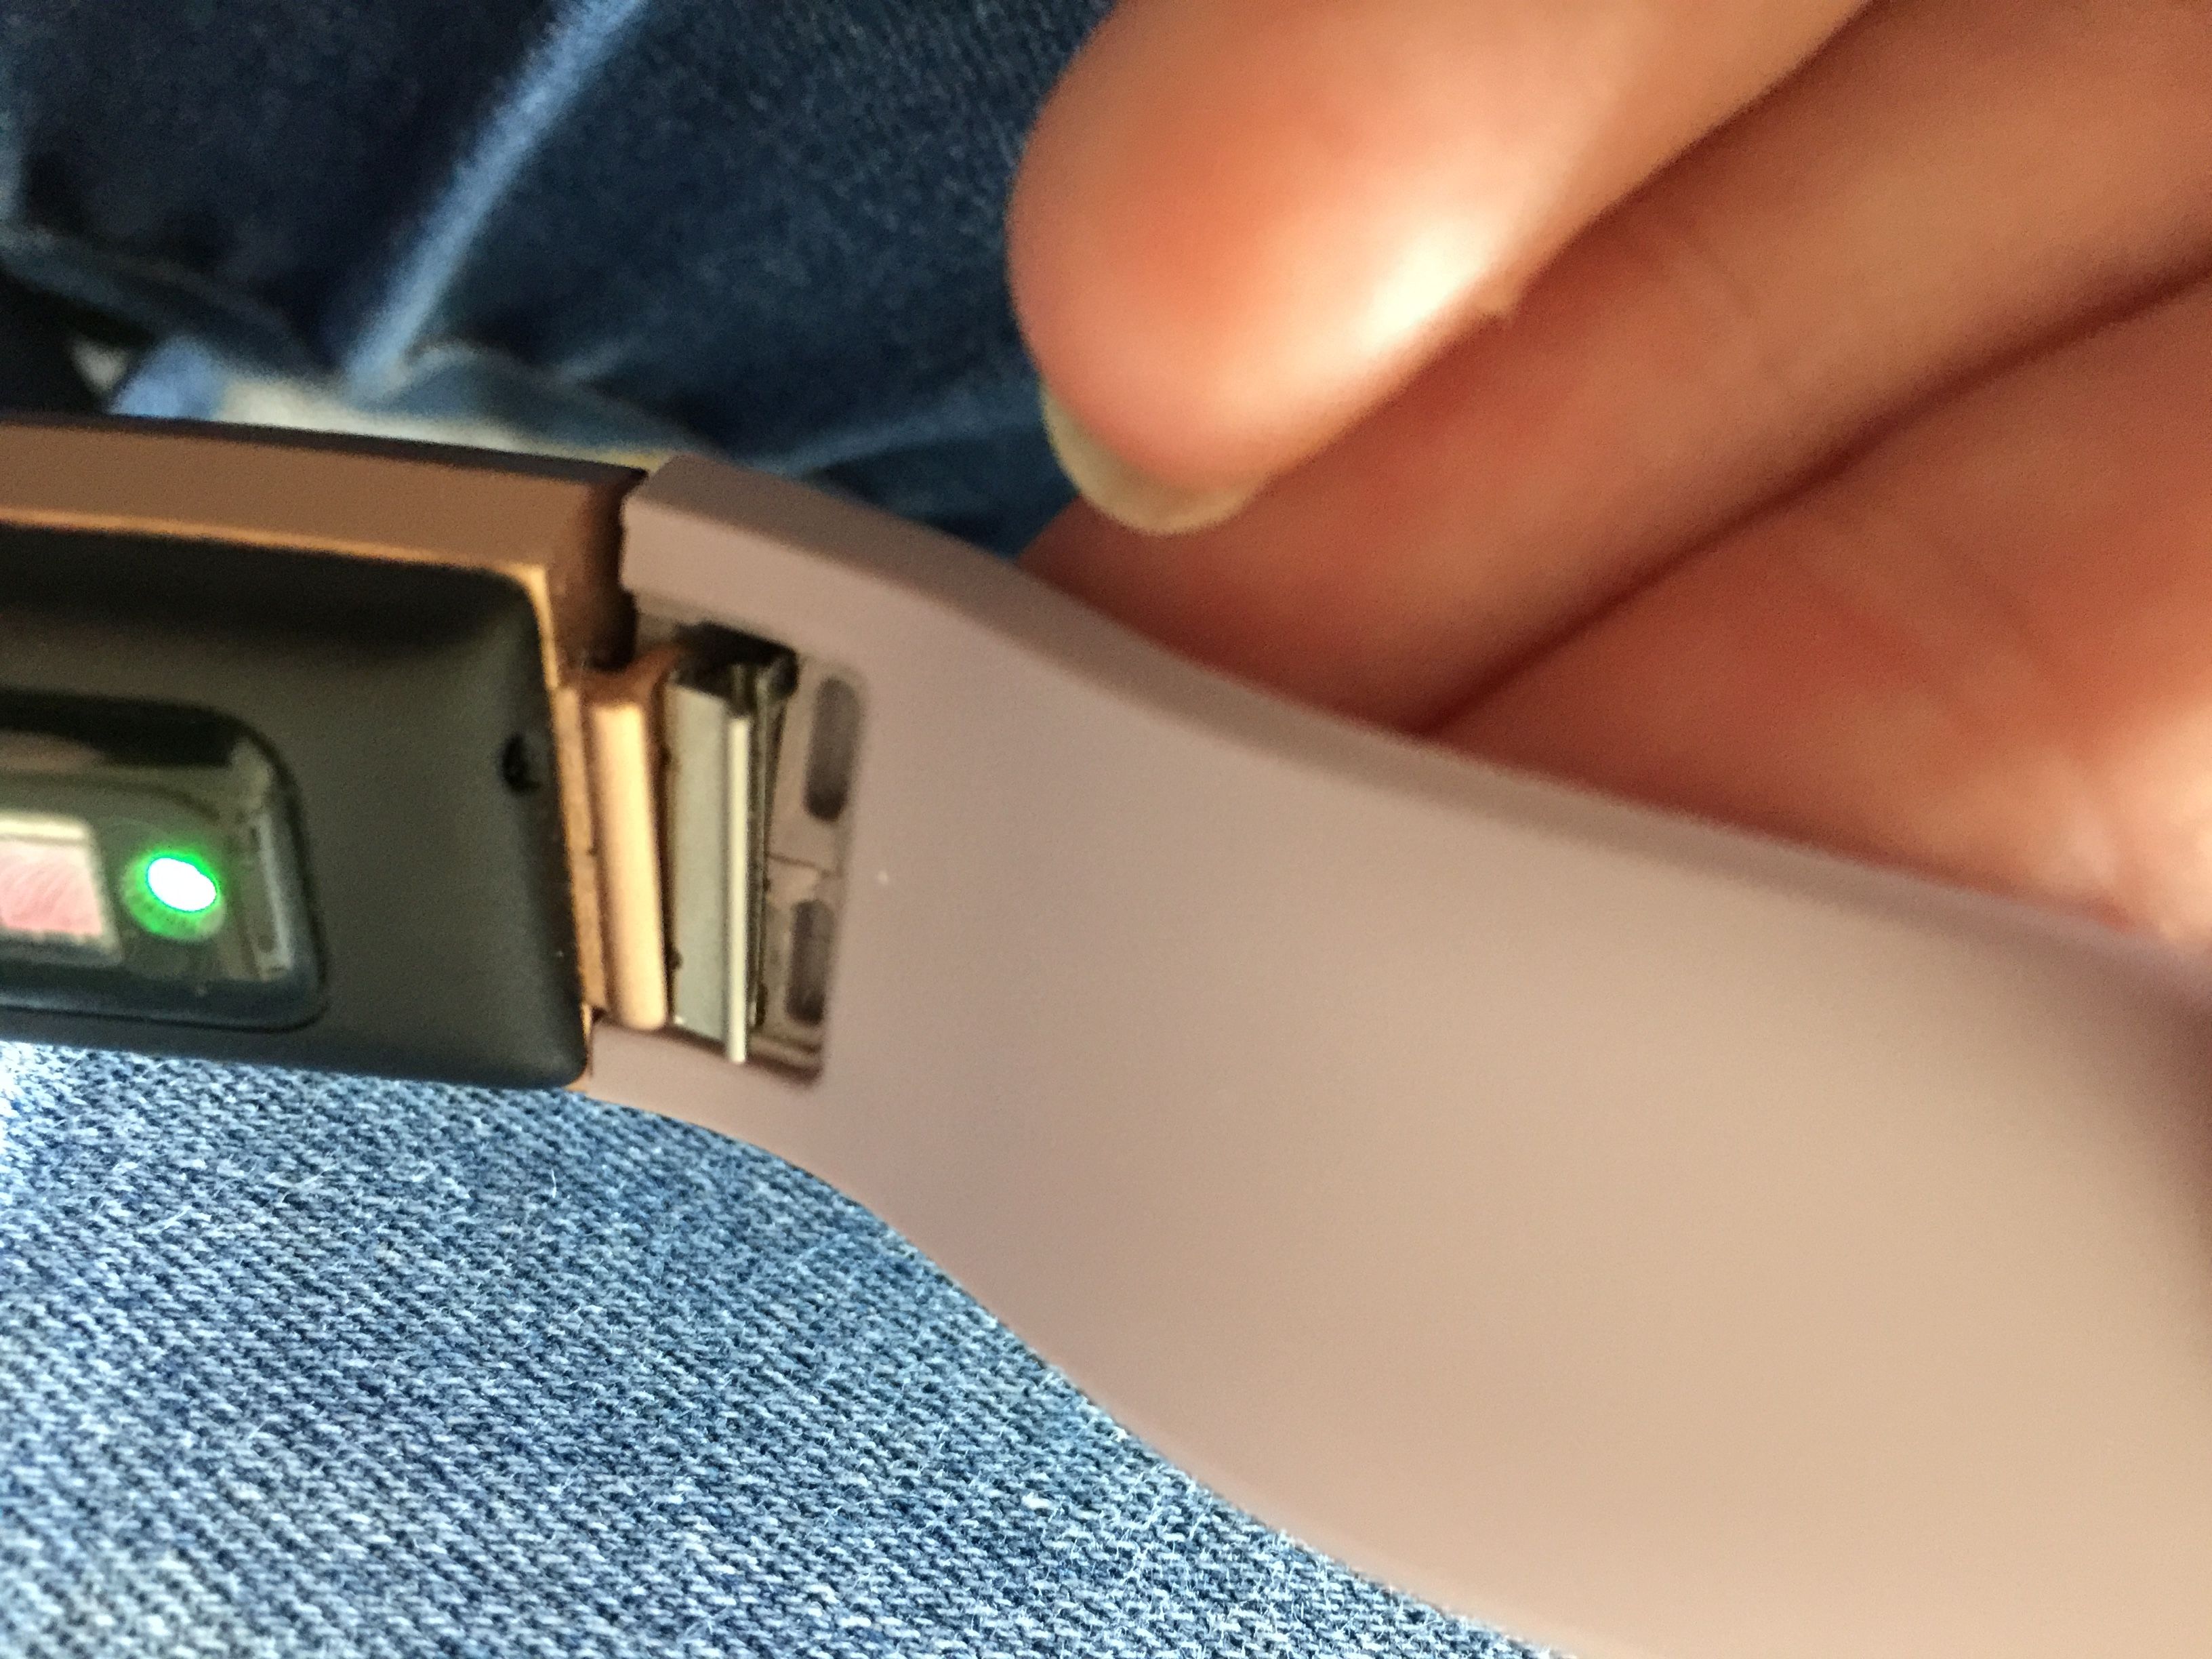 fitbit charge 3 band falls off